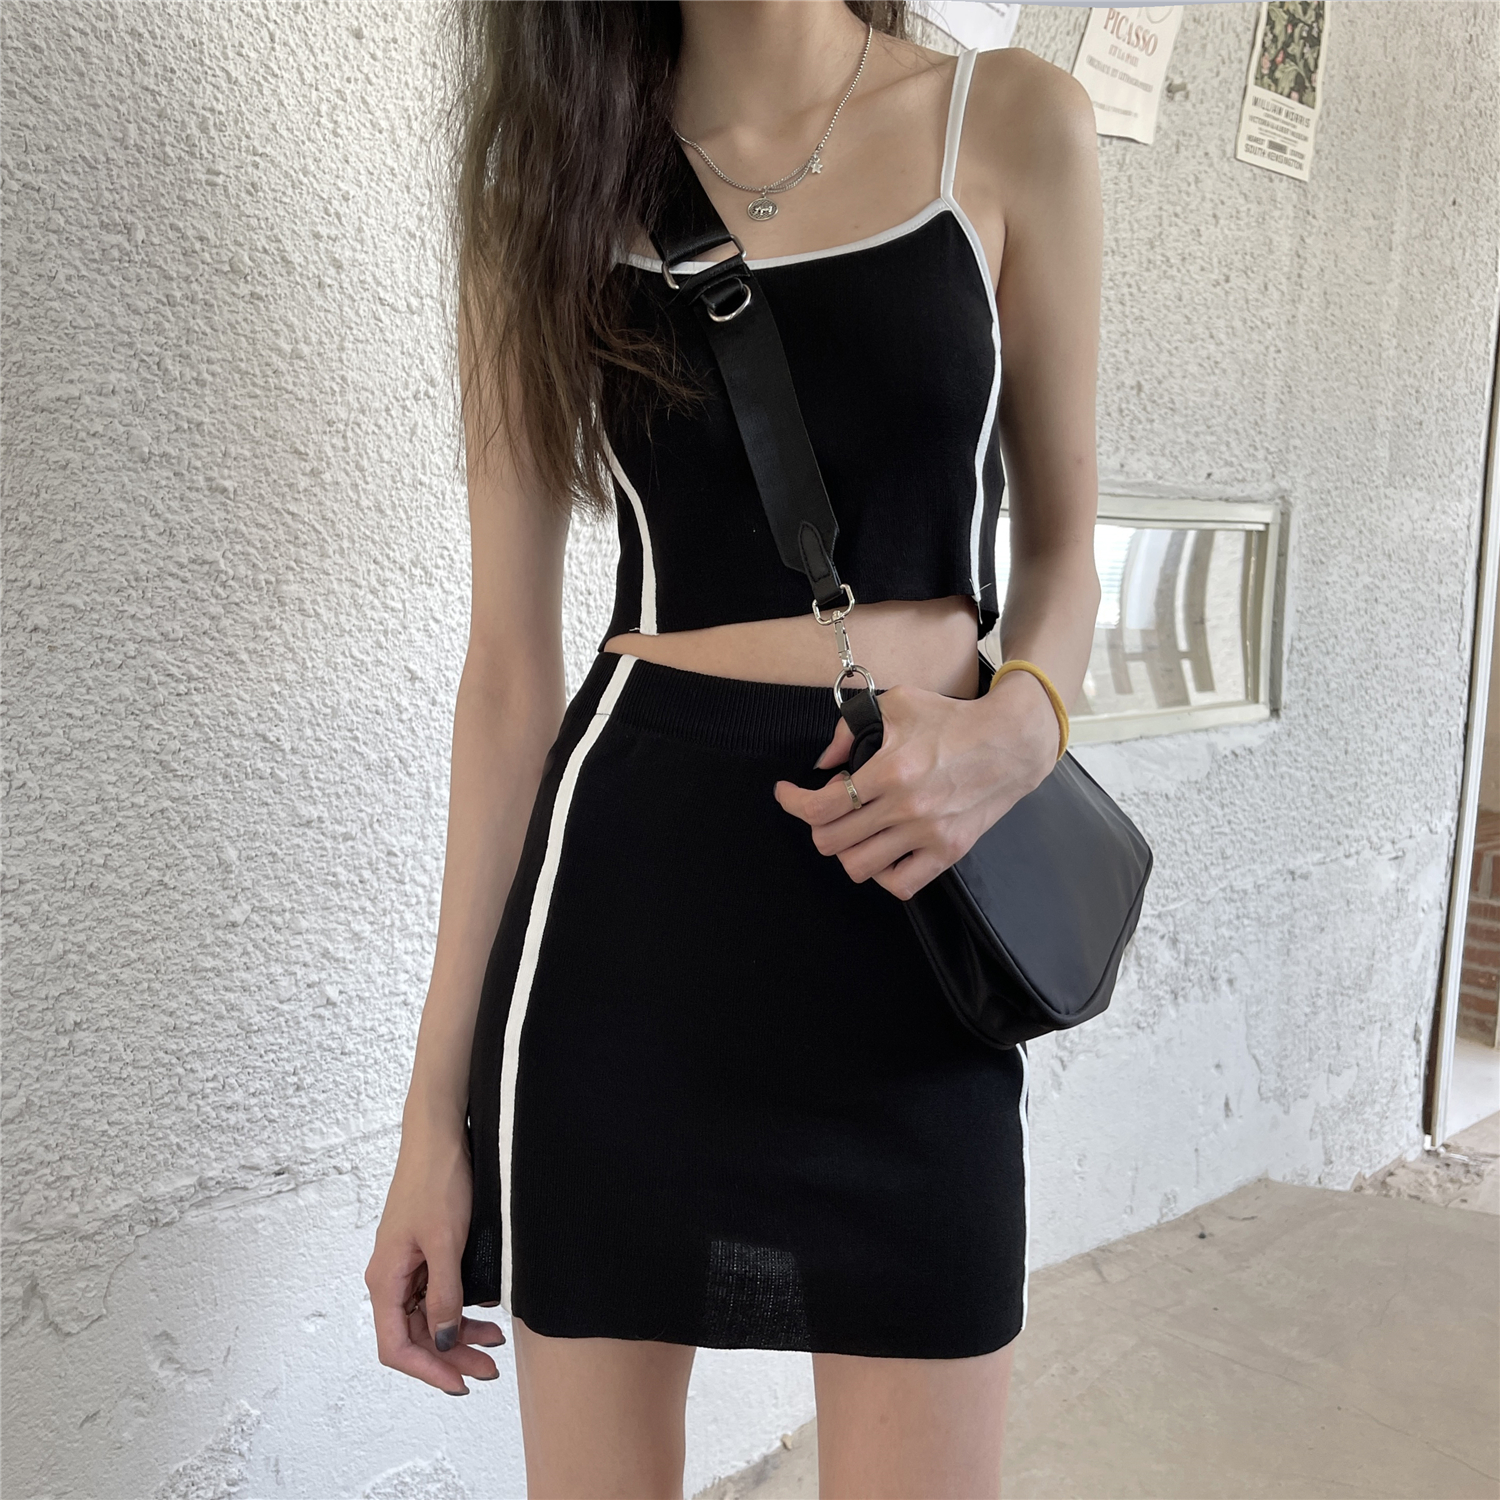 Real price real shooting campus Spice Girls Fashion suit women's knitting suspender Vest + skirt two piece set